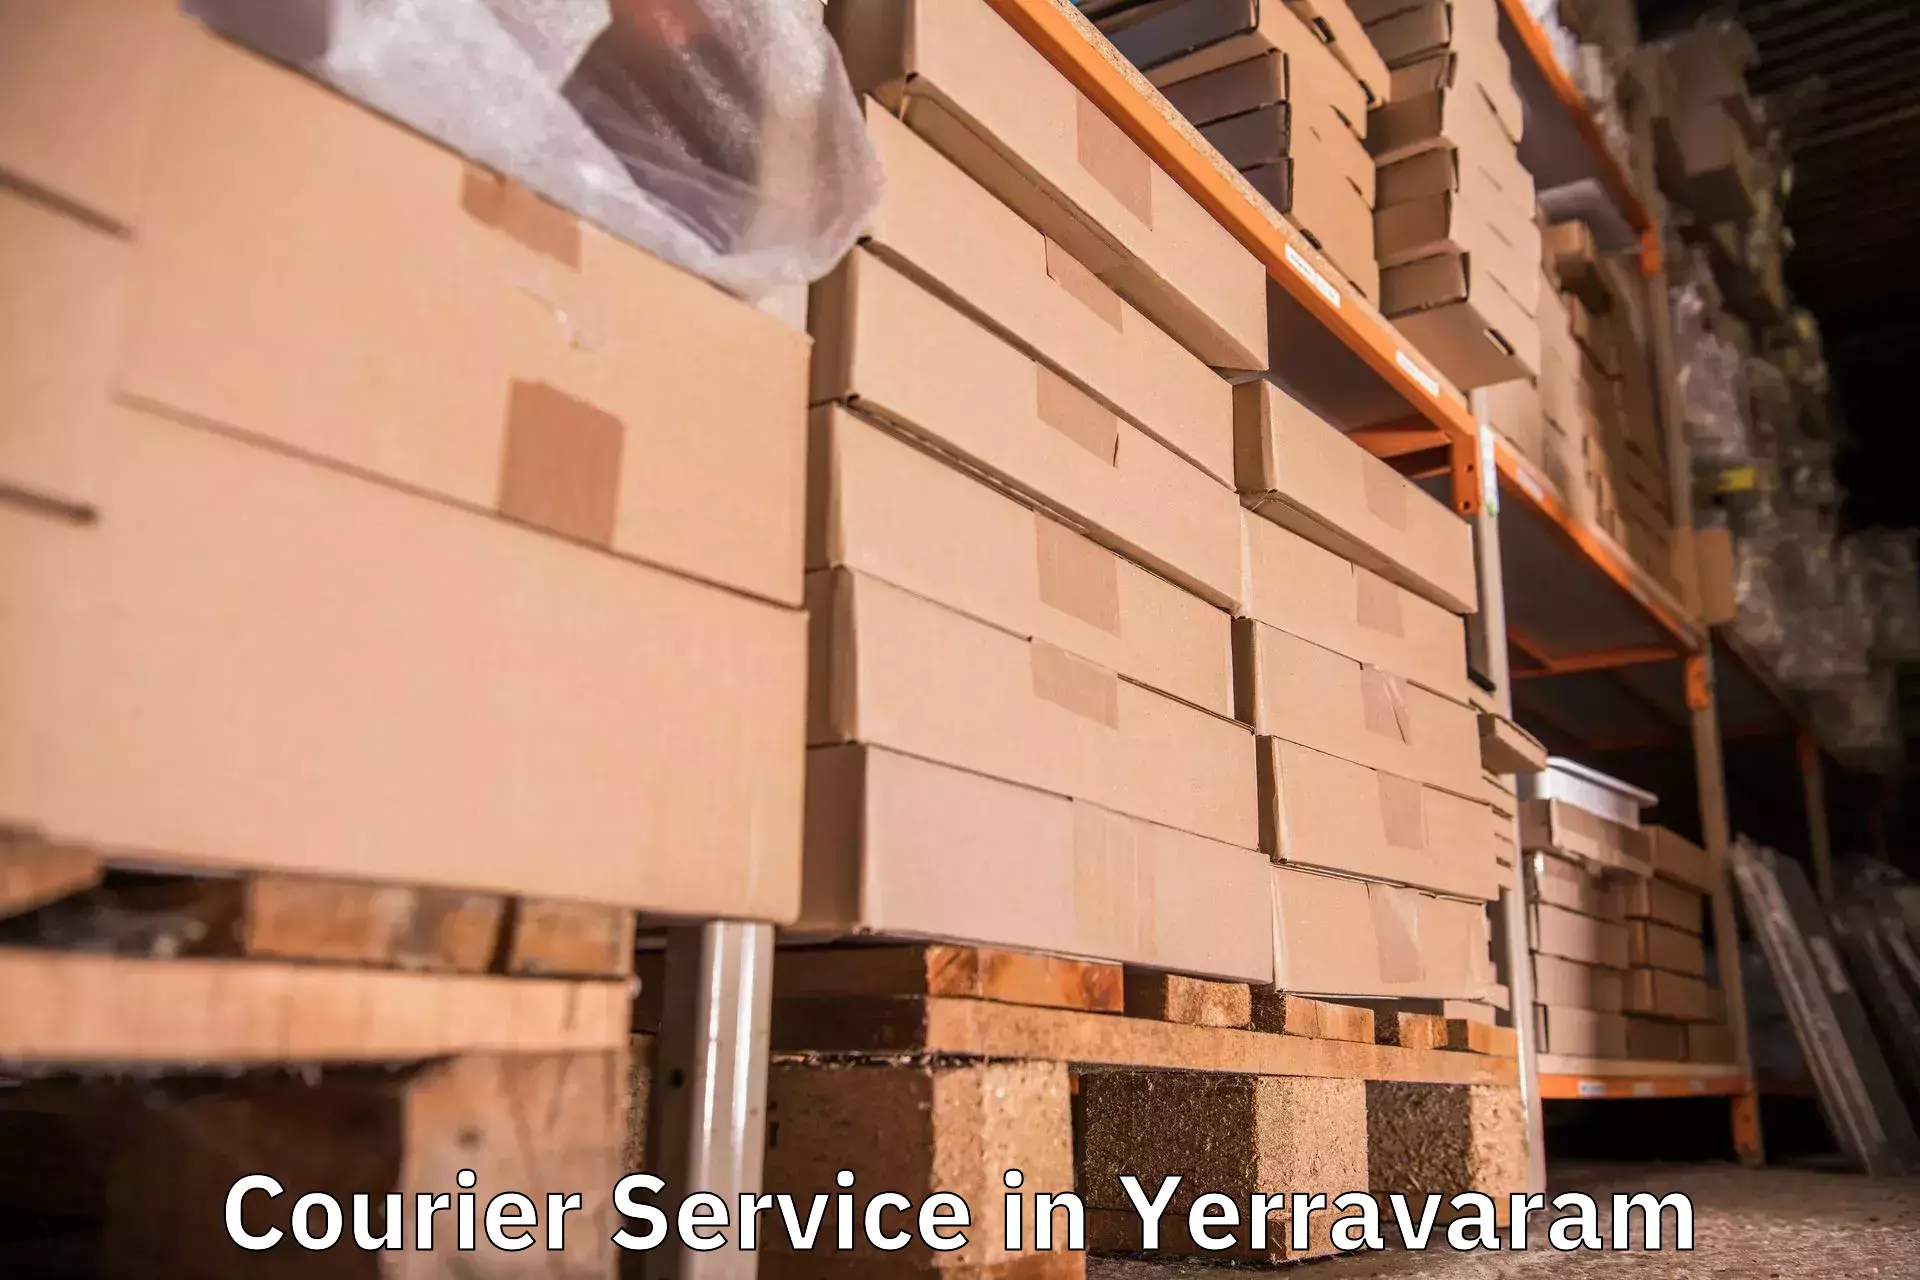 Express delivery solutions in Yerravaram